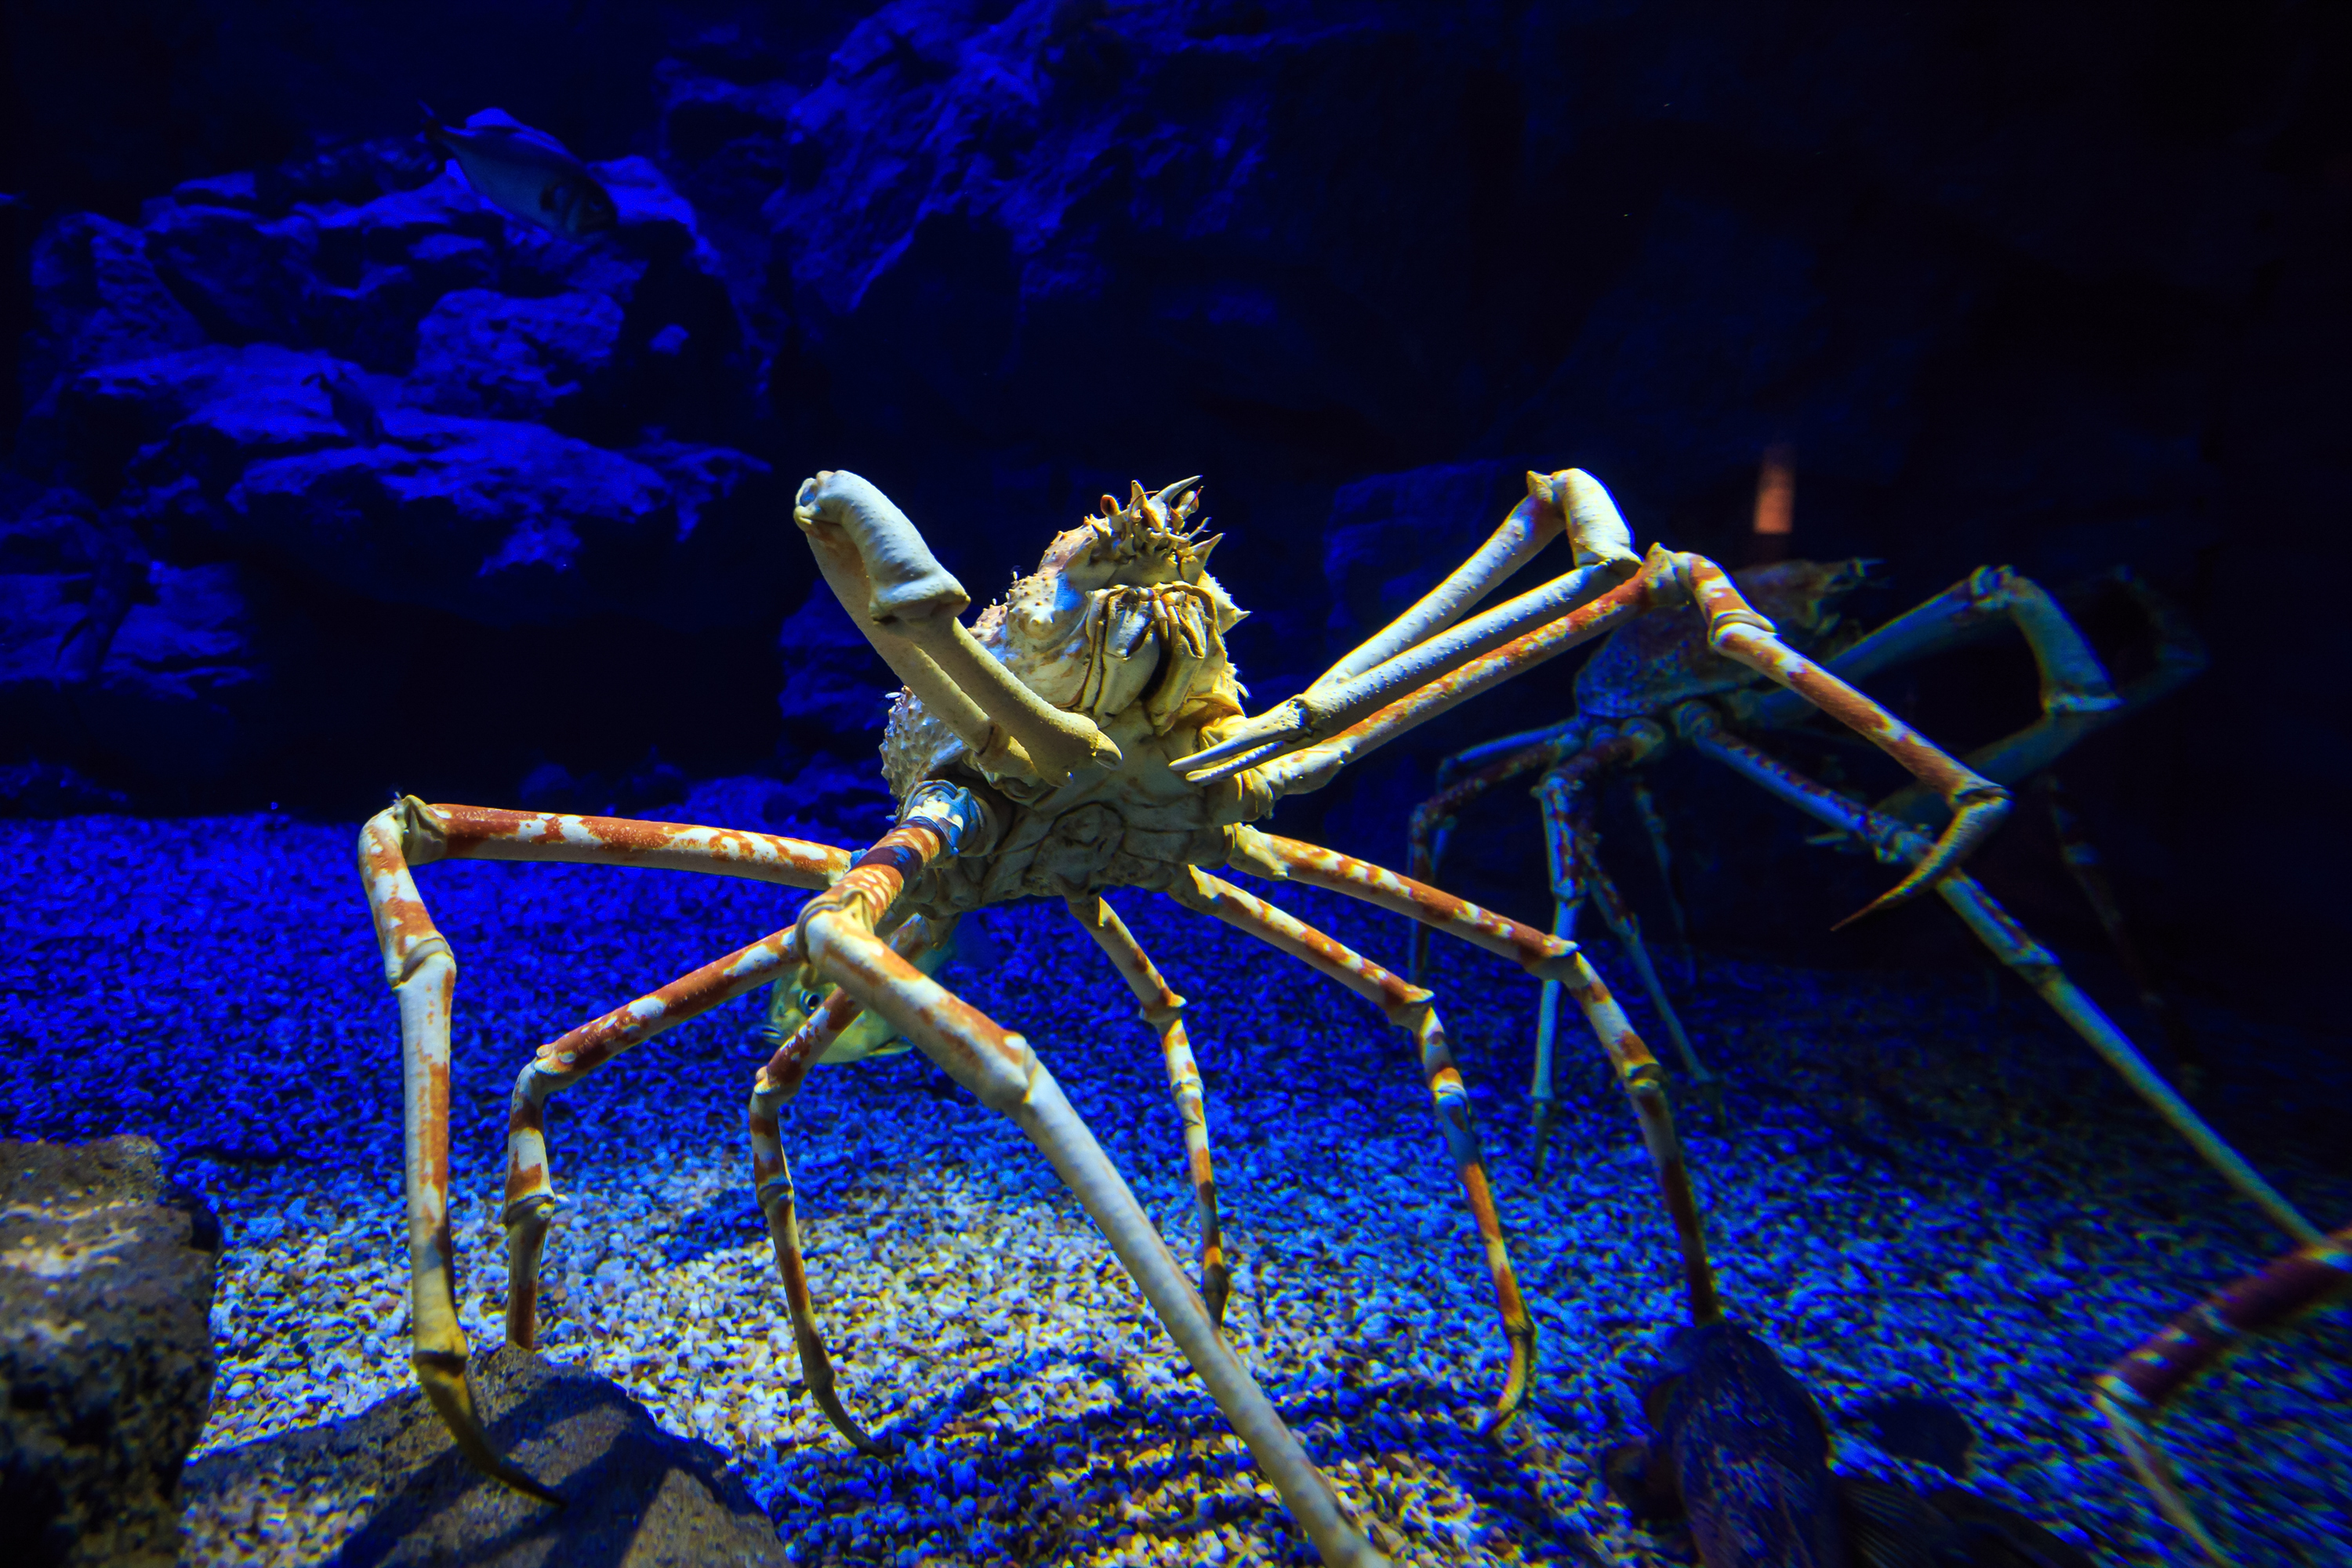 Watch A Giant Spider Crab Bust Out Of Its Own Shell In Wild Time Lapse Video Live Science